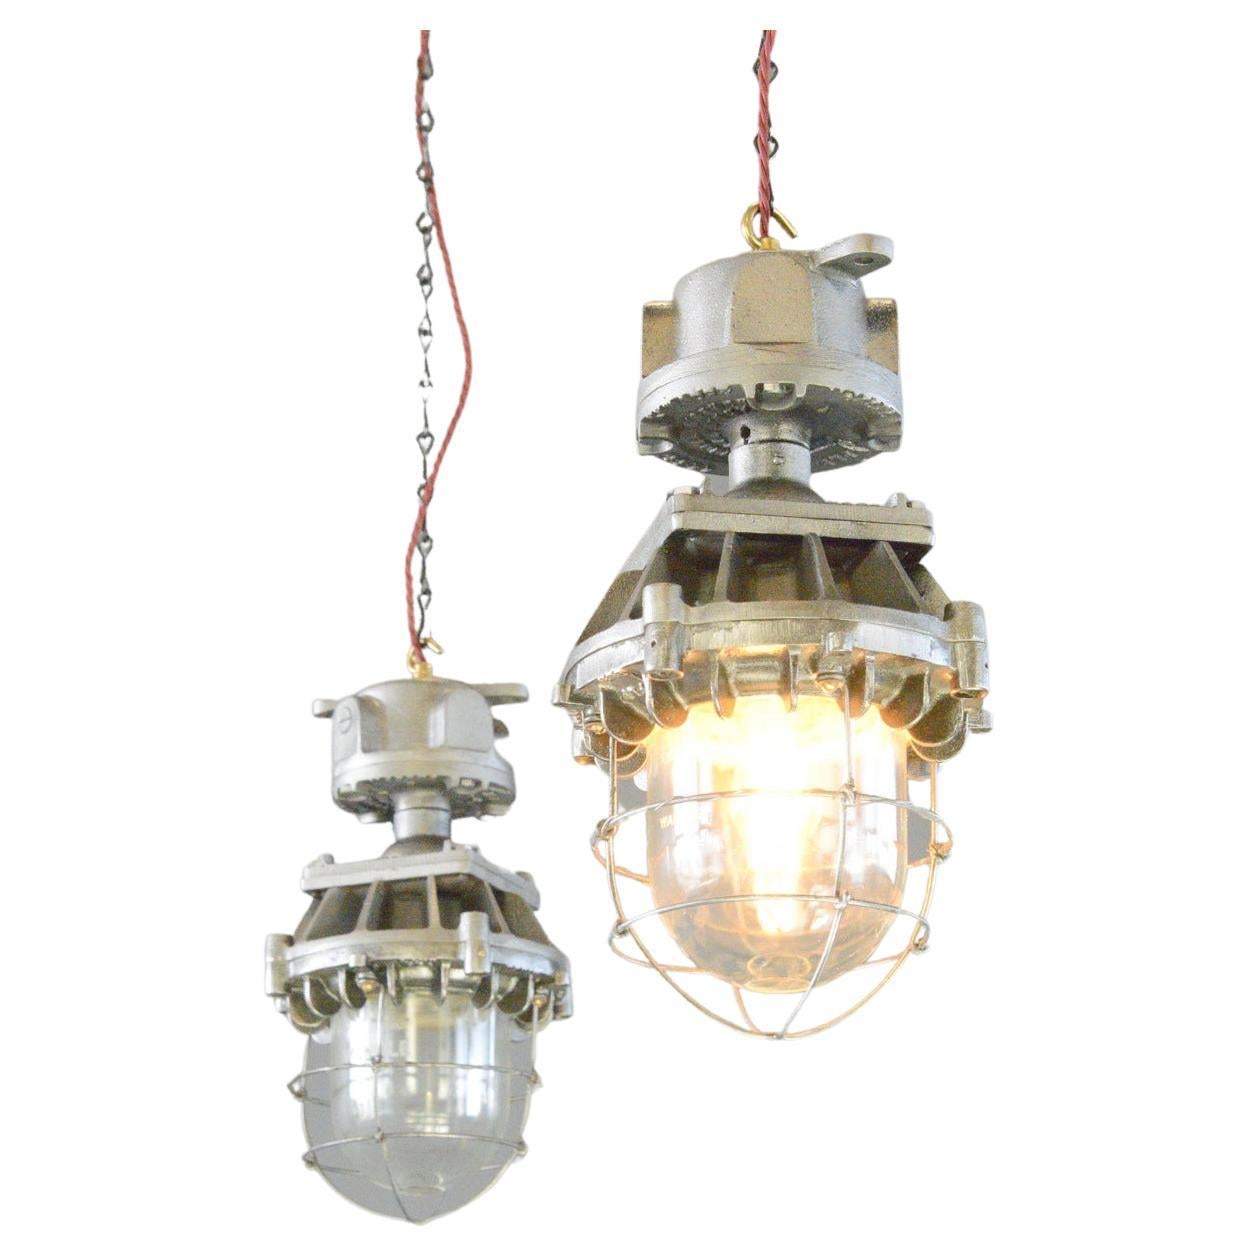 Explosion Proof Pendant Lights by Wardle, circa 1930s